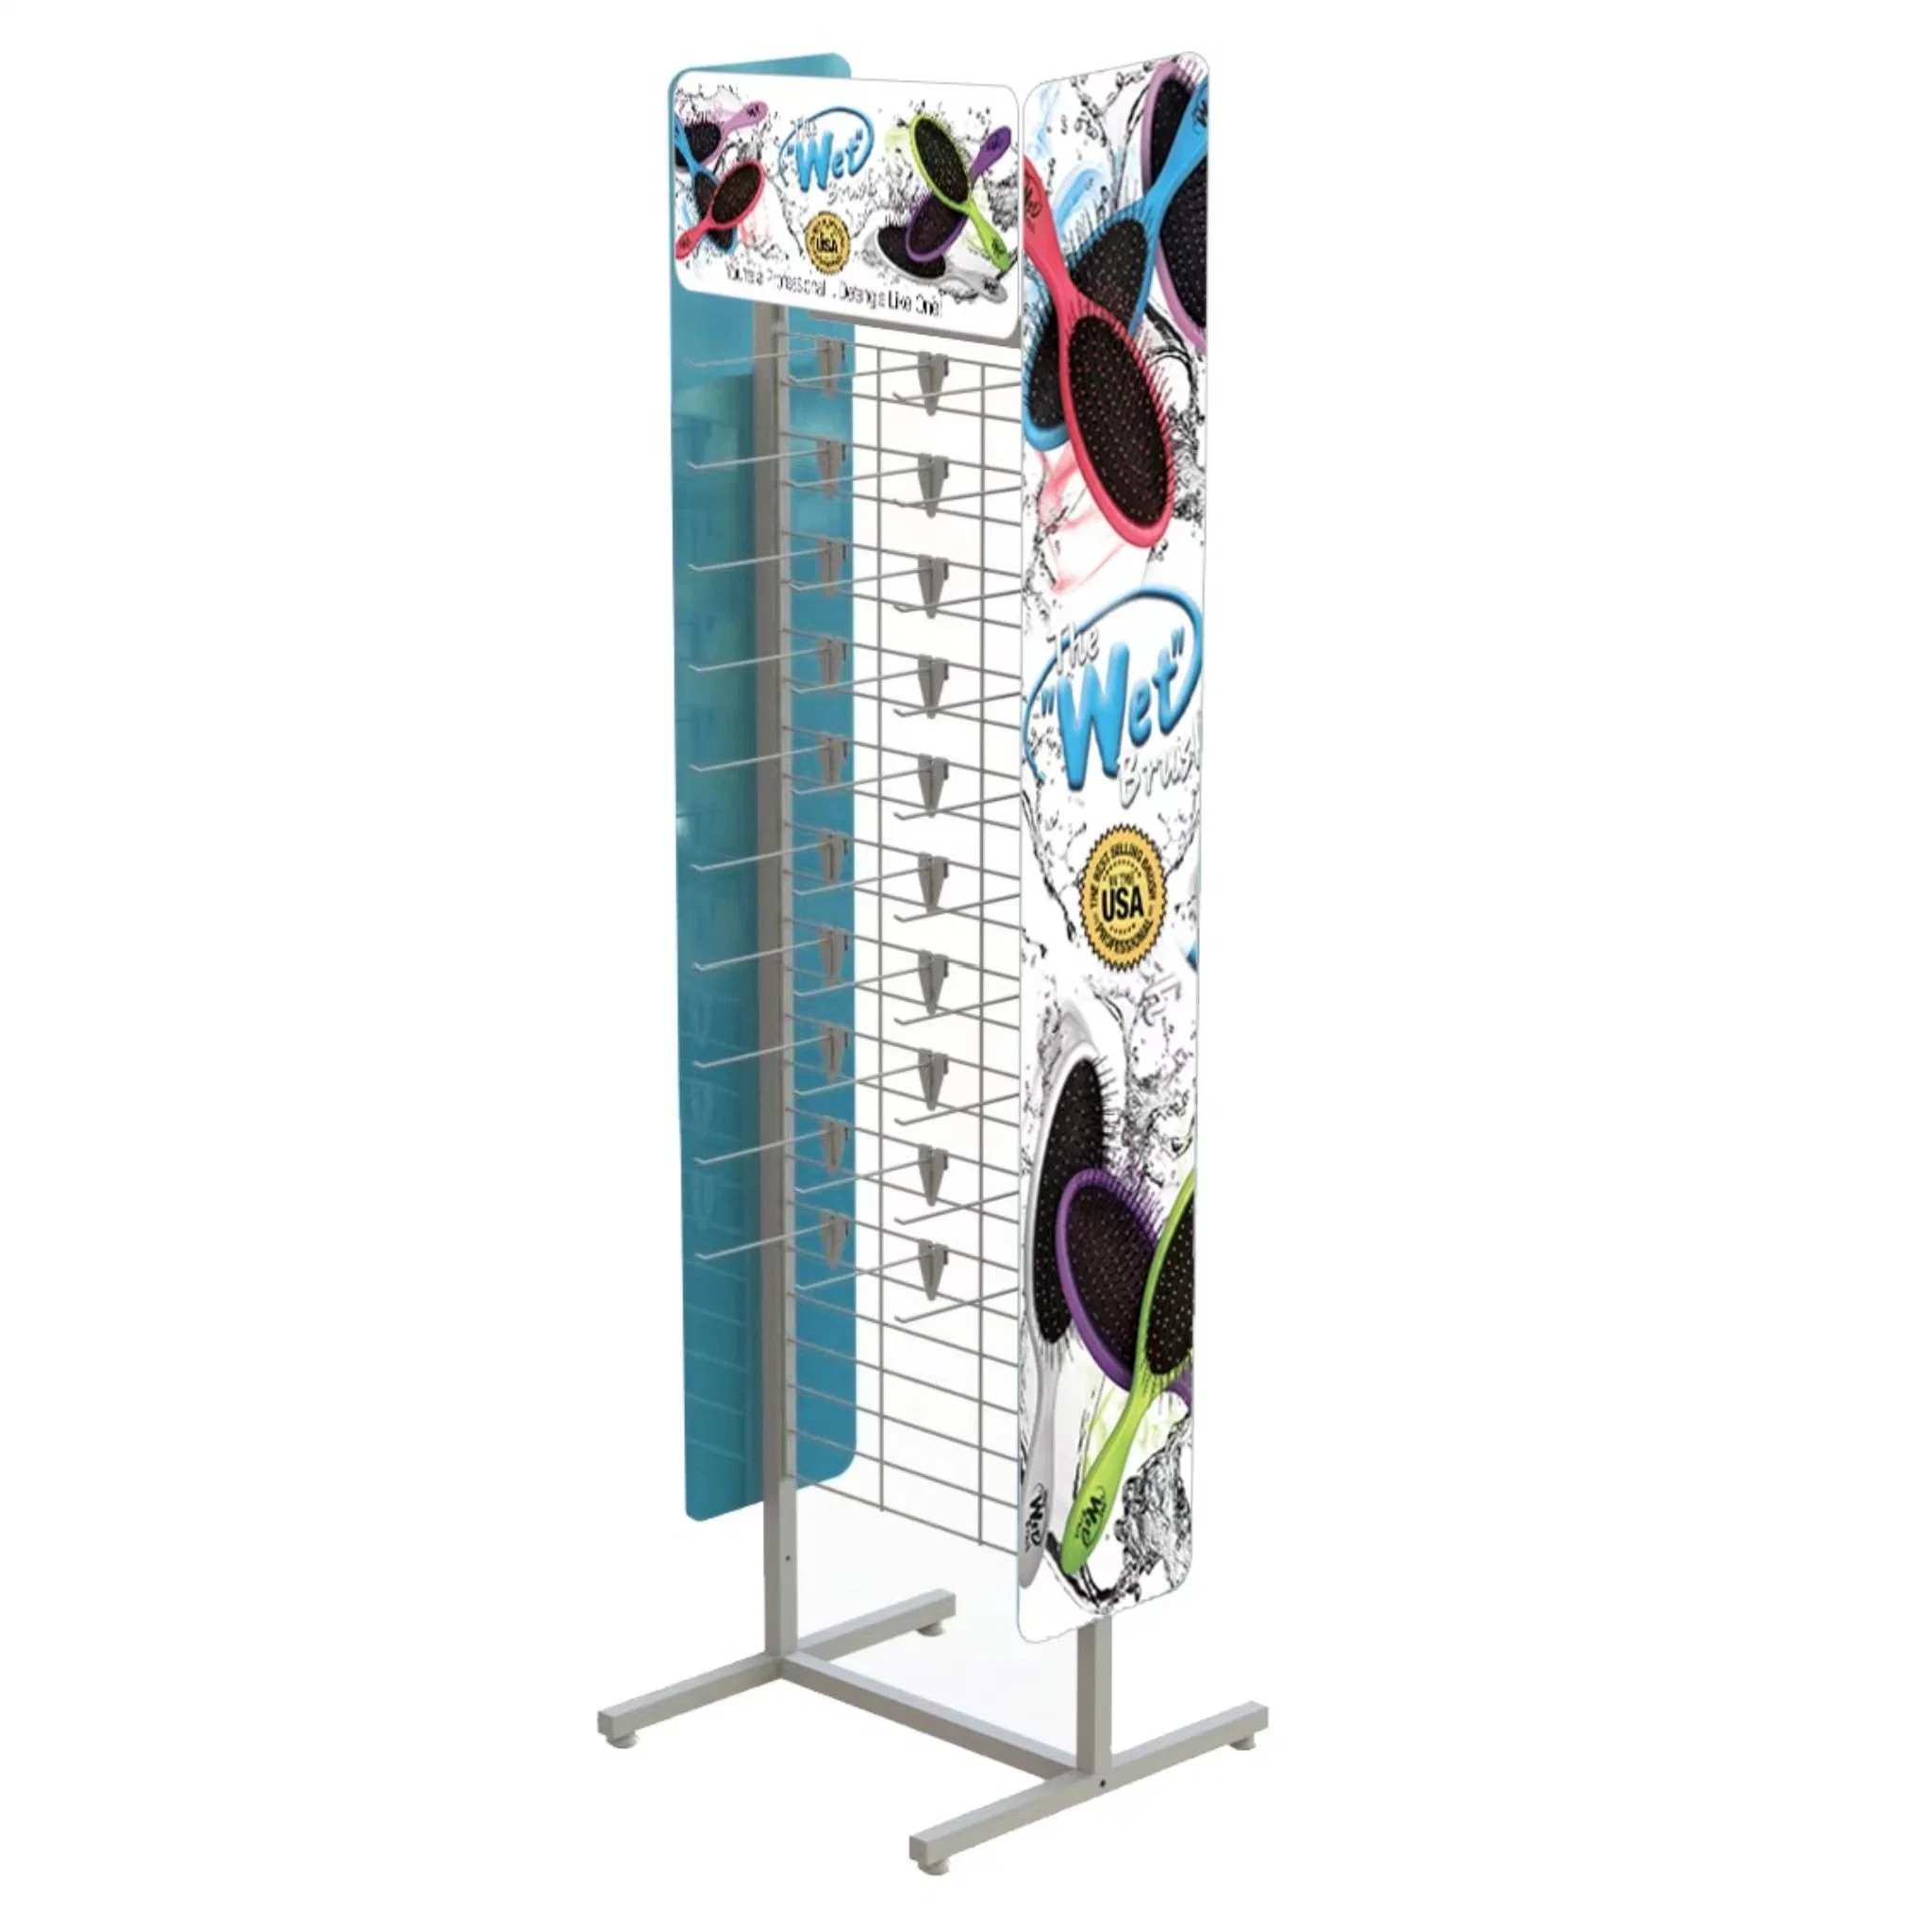 Wholesales Customized Floor Standing Metal Wire Brochure Display Stand Rack with Hooks